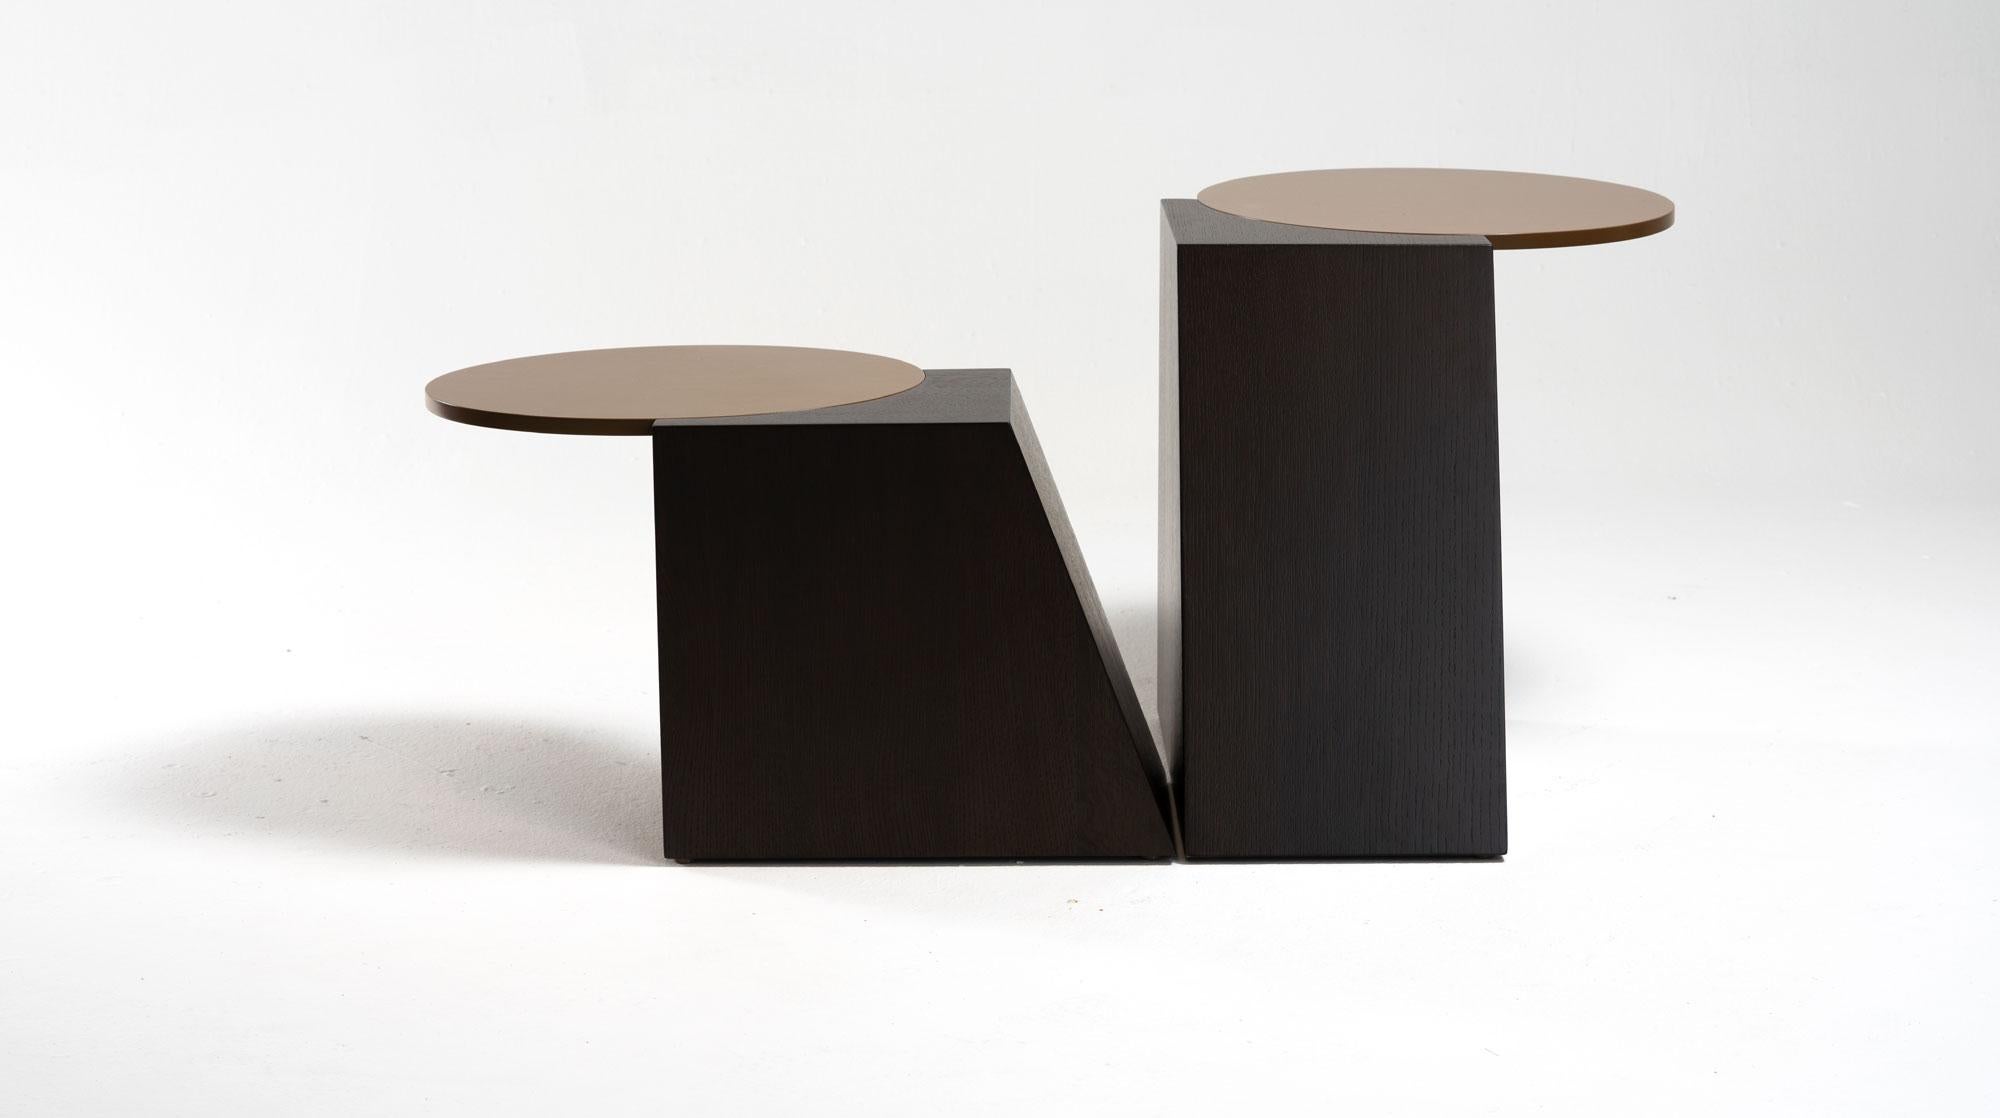 Set of 2 V tables by Jason Mizrahi
Dimensions: High W 27.5”, D 16.5”, H 18”
 Low W 24”, D 16”, H 13.5”
Materials: Base in stained oak with MDF top stained in caramel.

Available in Walnut, Oak and Ash.
Stain/Color: Customized upon